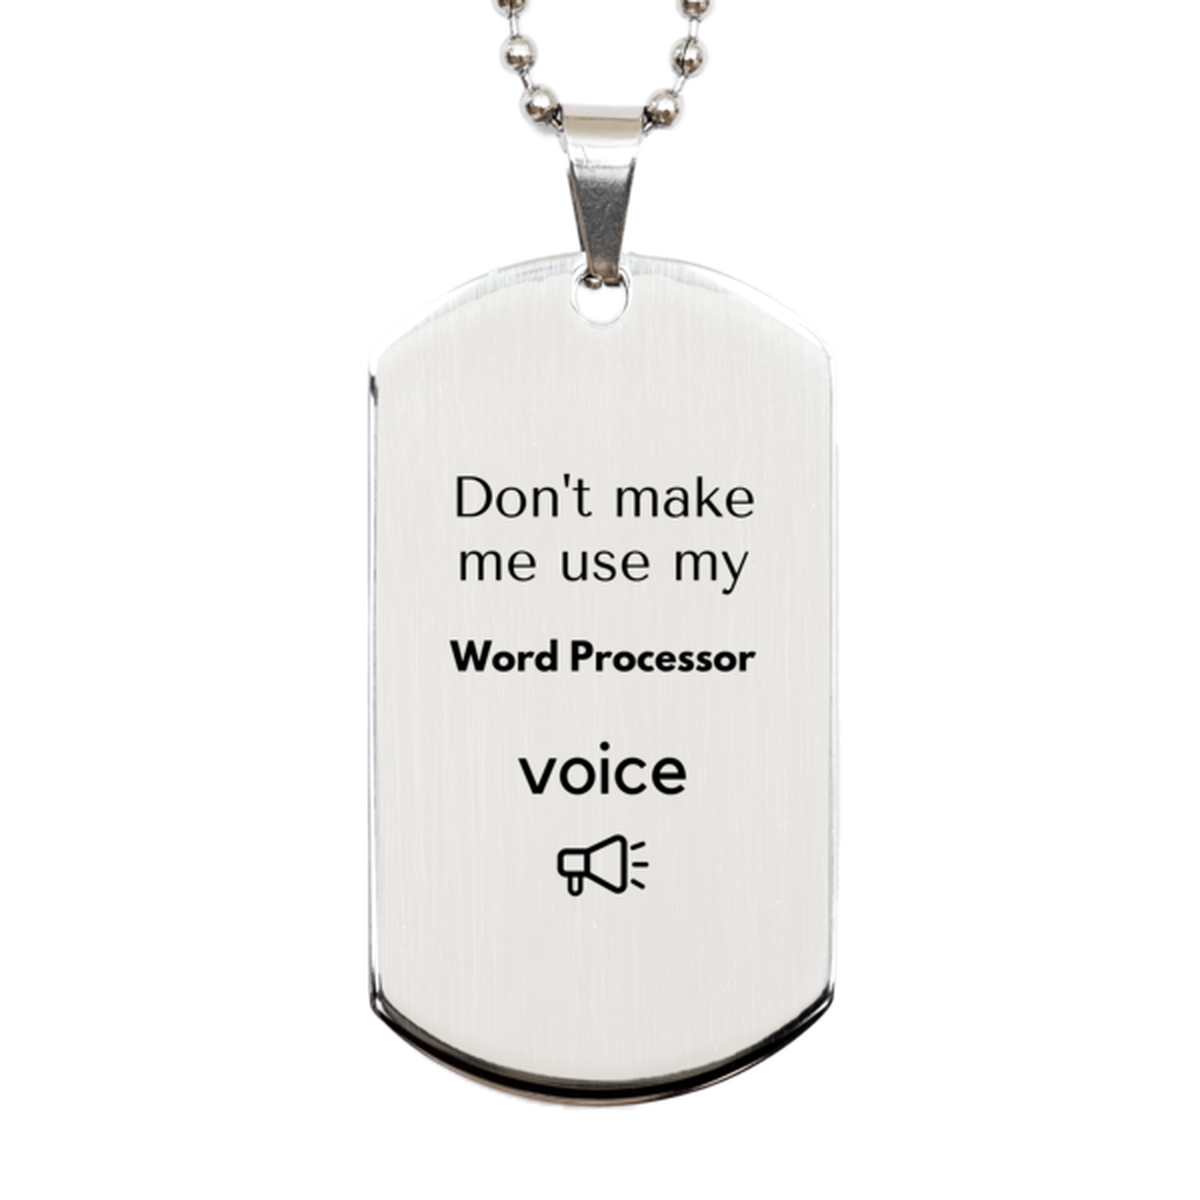 Don't make me use my Word Processor voice, Sarcasm Word Processor Gifts, Christmas Word Processor Silver Dog Tag Birthday Unique Gifts For Word Processor Coworkers, Men, Women, Colleague, Friends